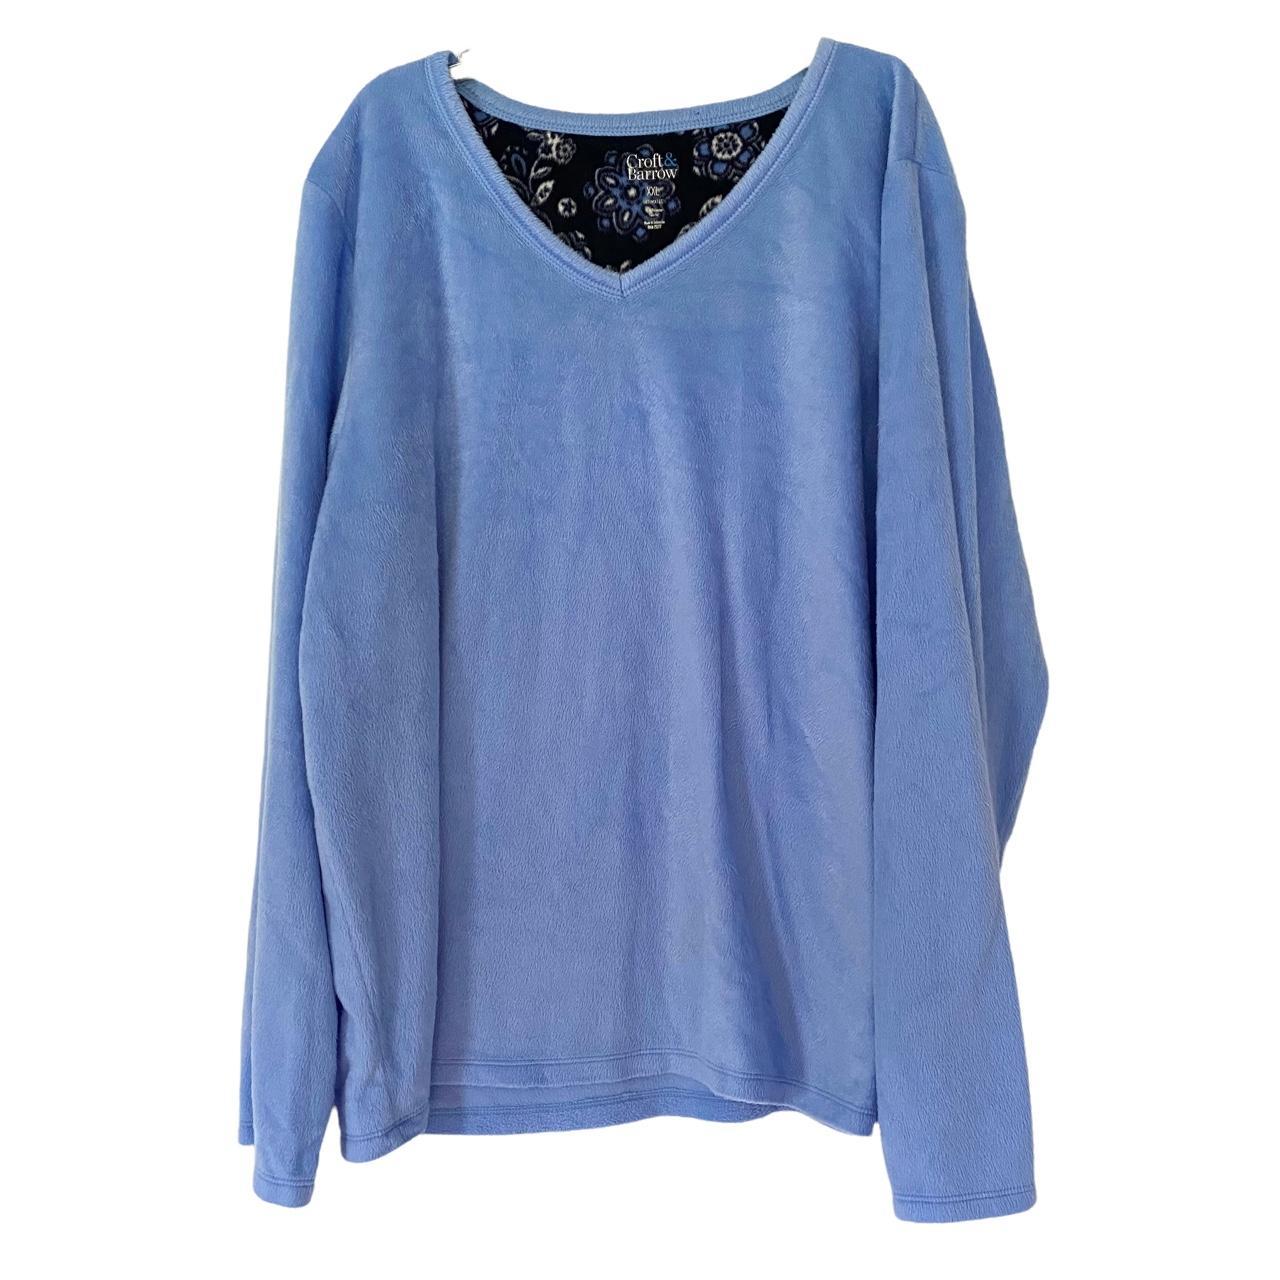 Product Image 1 - This is a top from